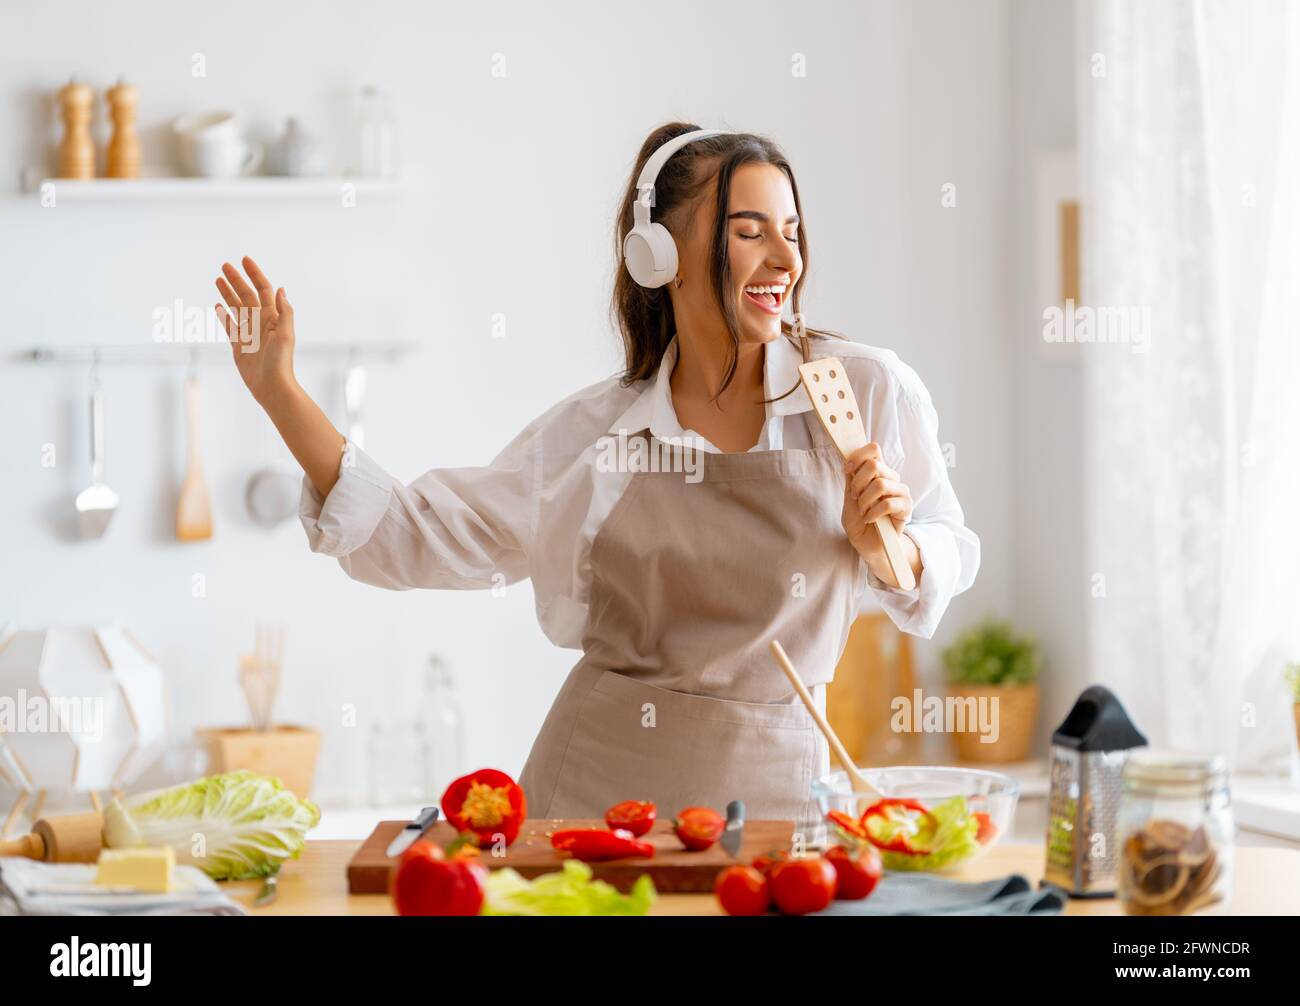 Healthy food at home. Woman is preparing the proper meal in the kitchen. Stock Photo